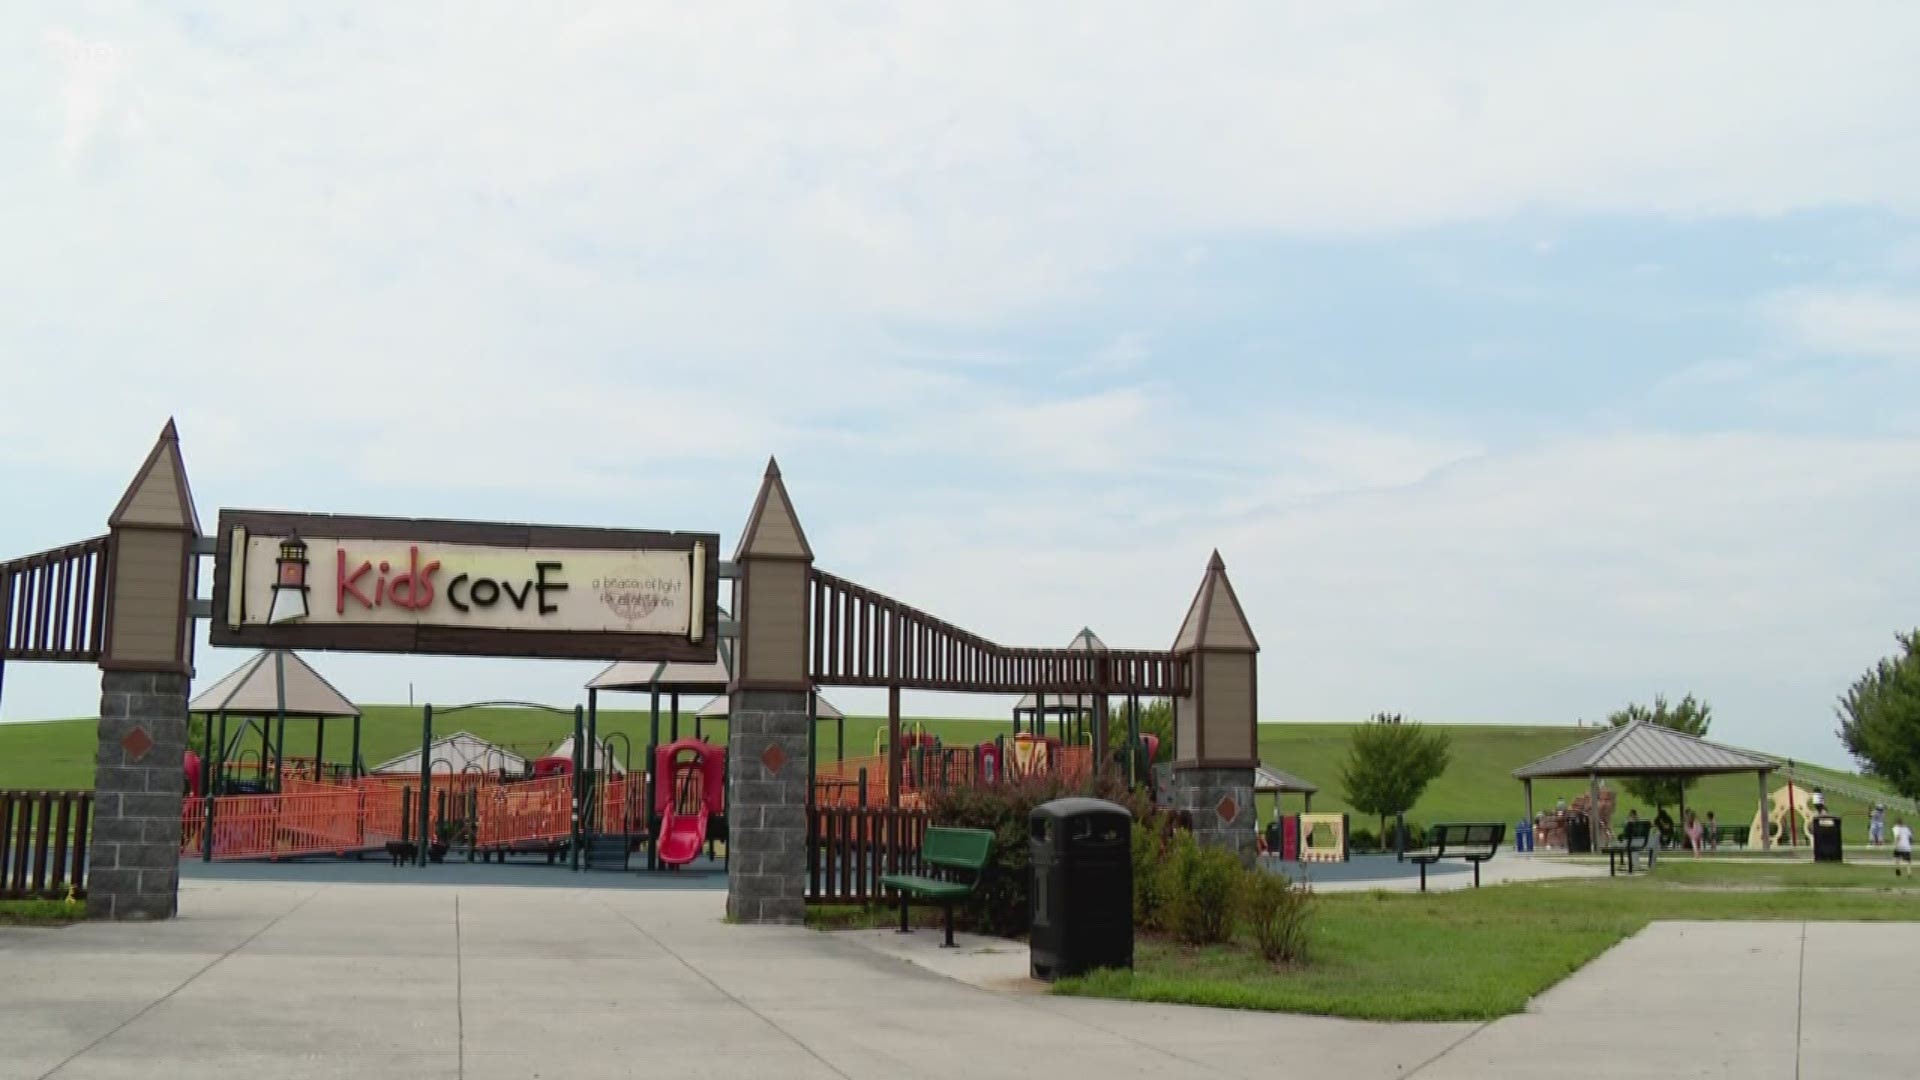 Brian Phelps said the Kids Cove at Mount Trashmore is probably one of the most used parks in the city and feedback has been positive since the reopening.